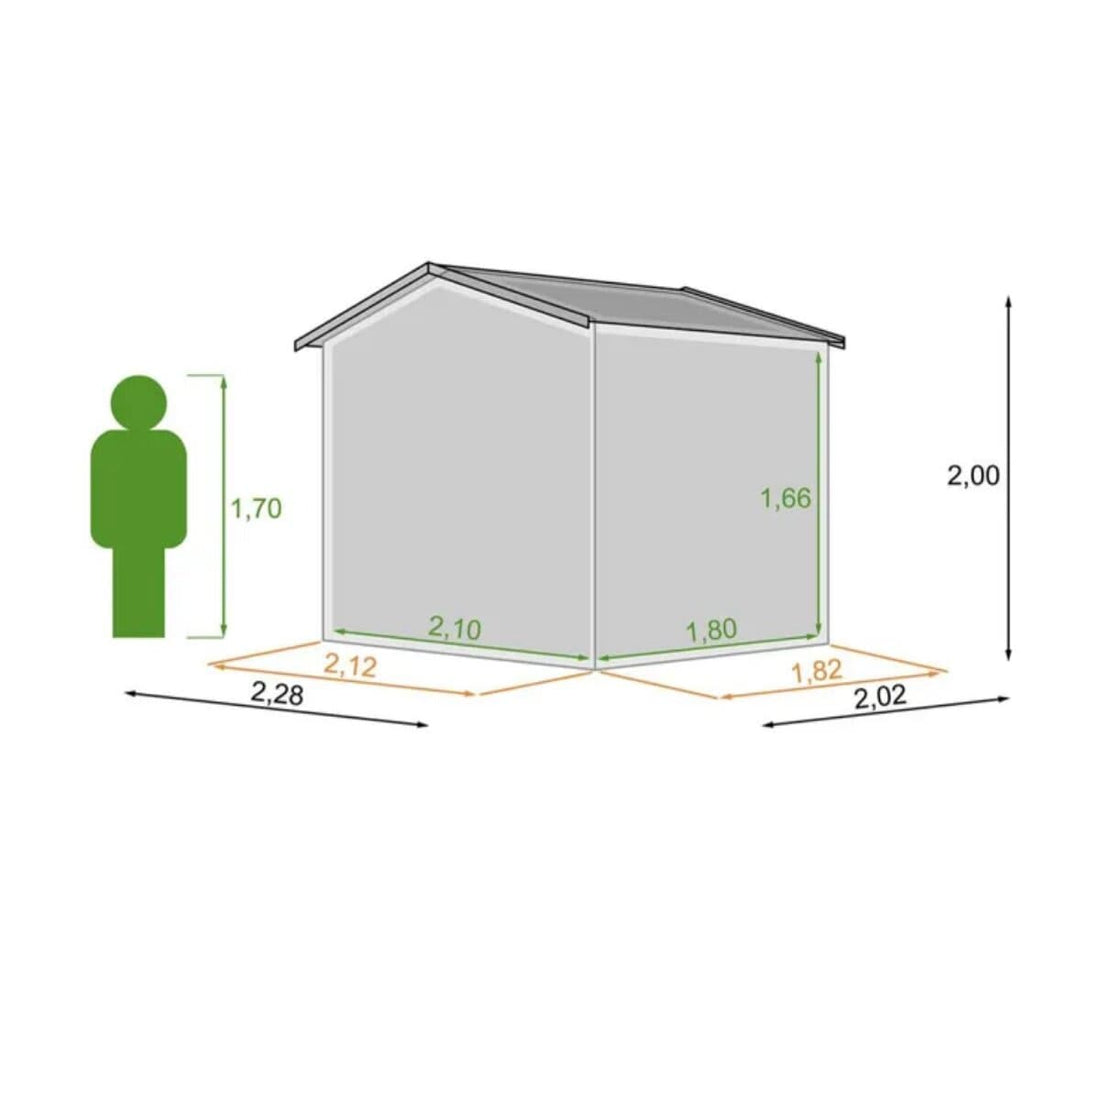 IRIS WOODEN SHED 2.10 X 1.80 12 MM PANELS - best price from Maltashopper.com BR500015915